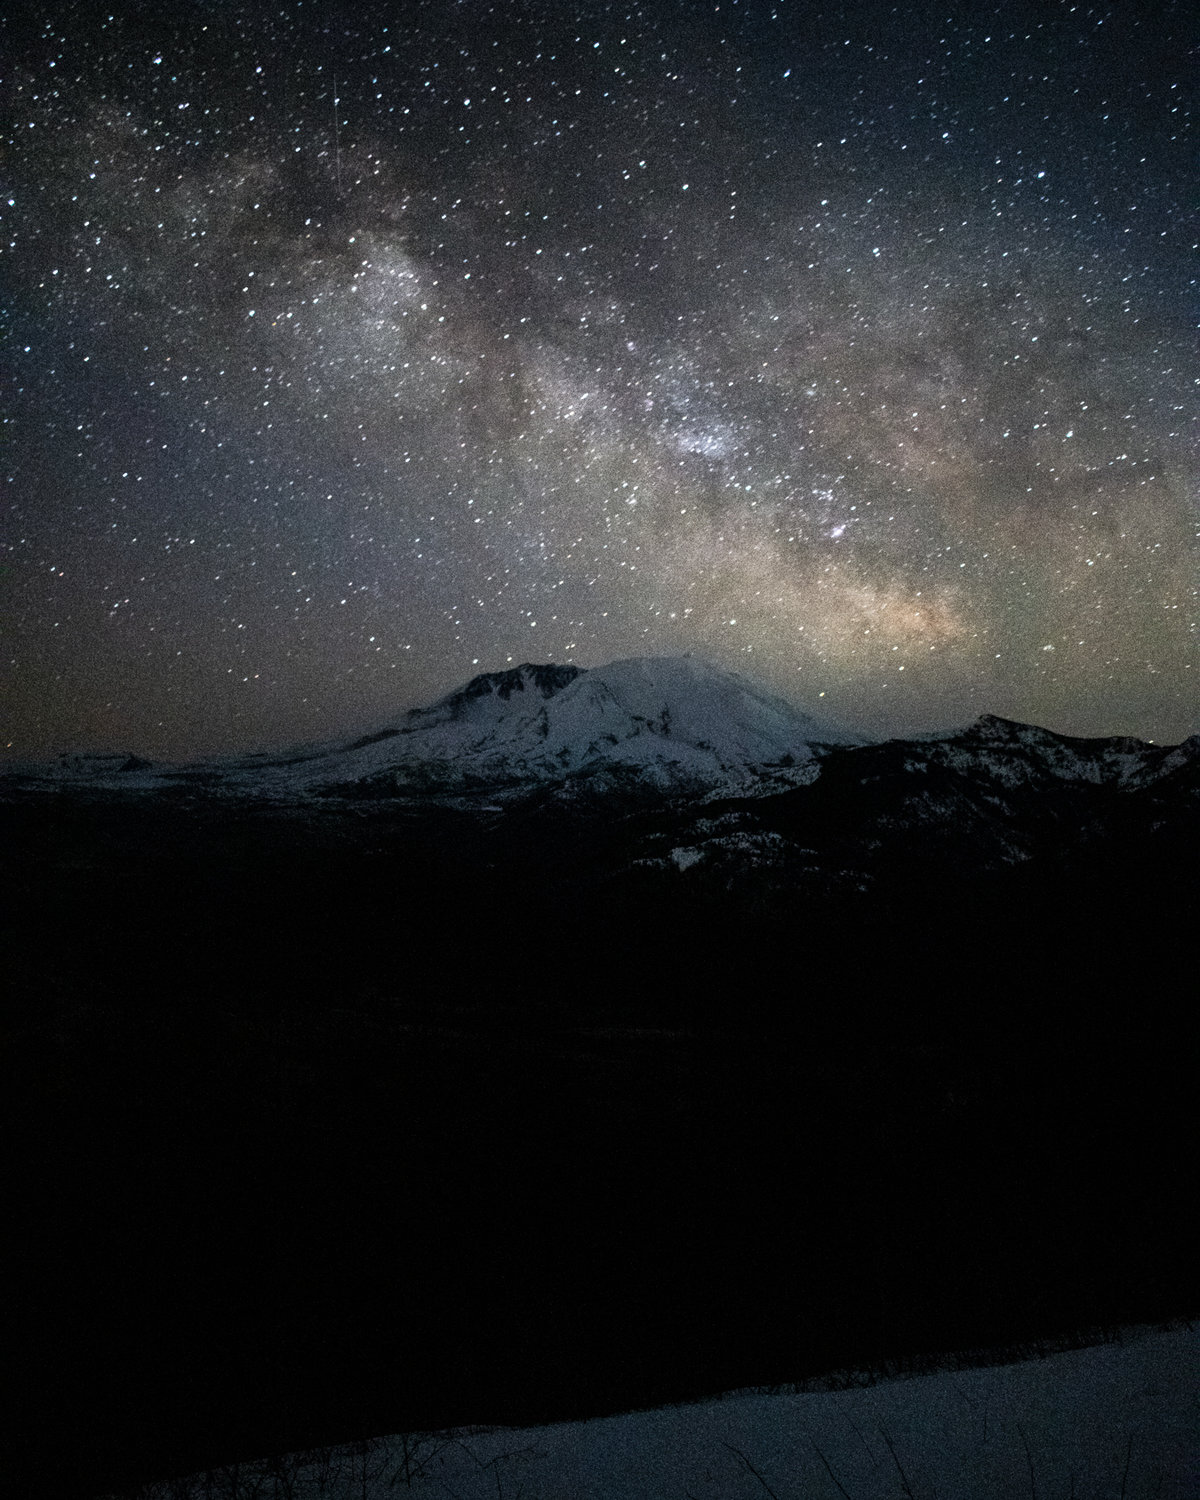 Photo: The Milky Way Shines Over Mount St. Helens | The Daily Chronicle